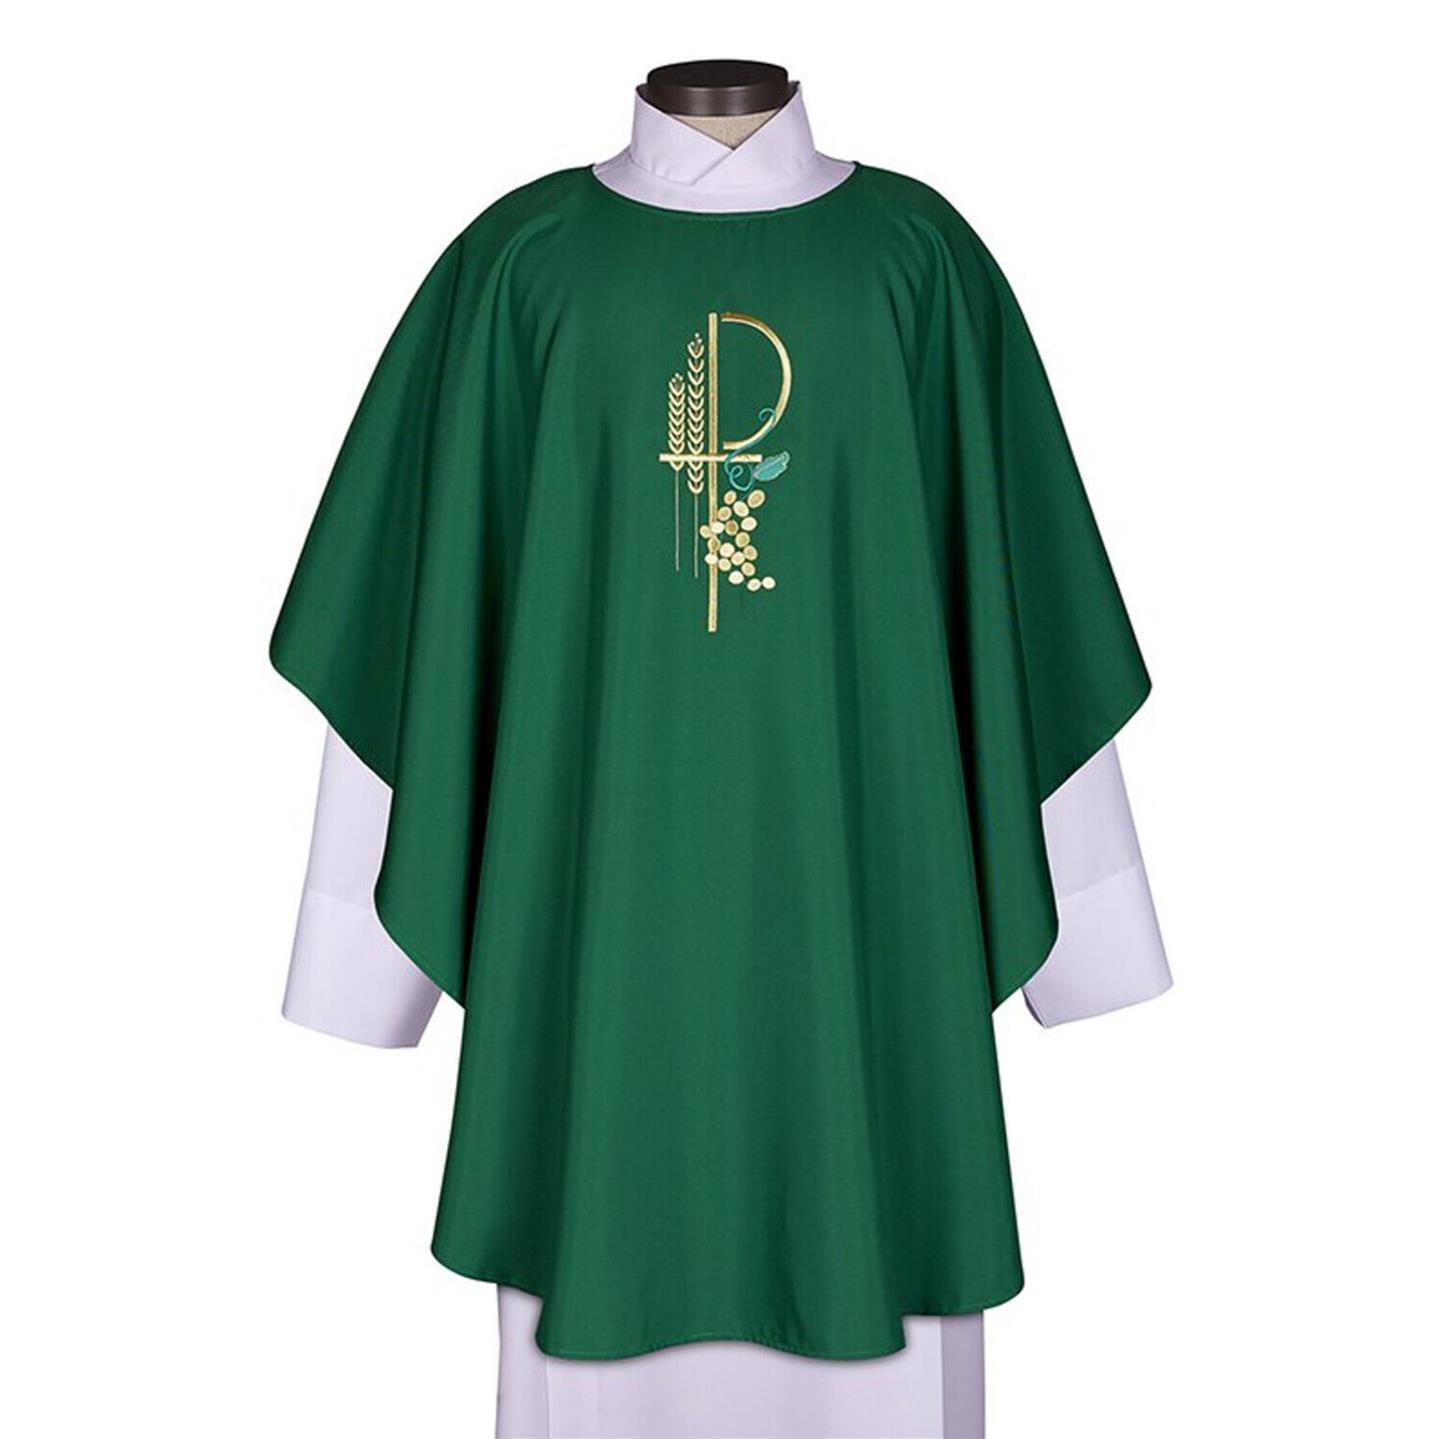 Embroidered Green Eucharistic Chasuble Roman Catholic Vestment for Priests 46 In